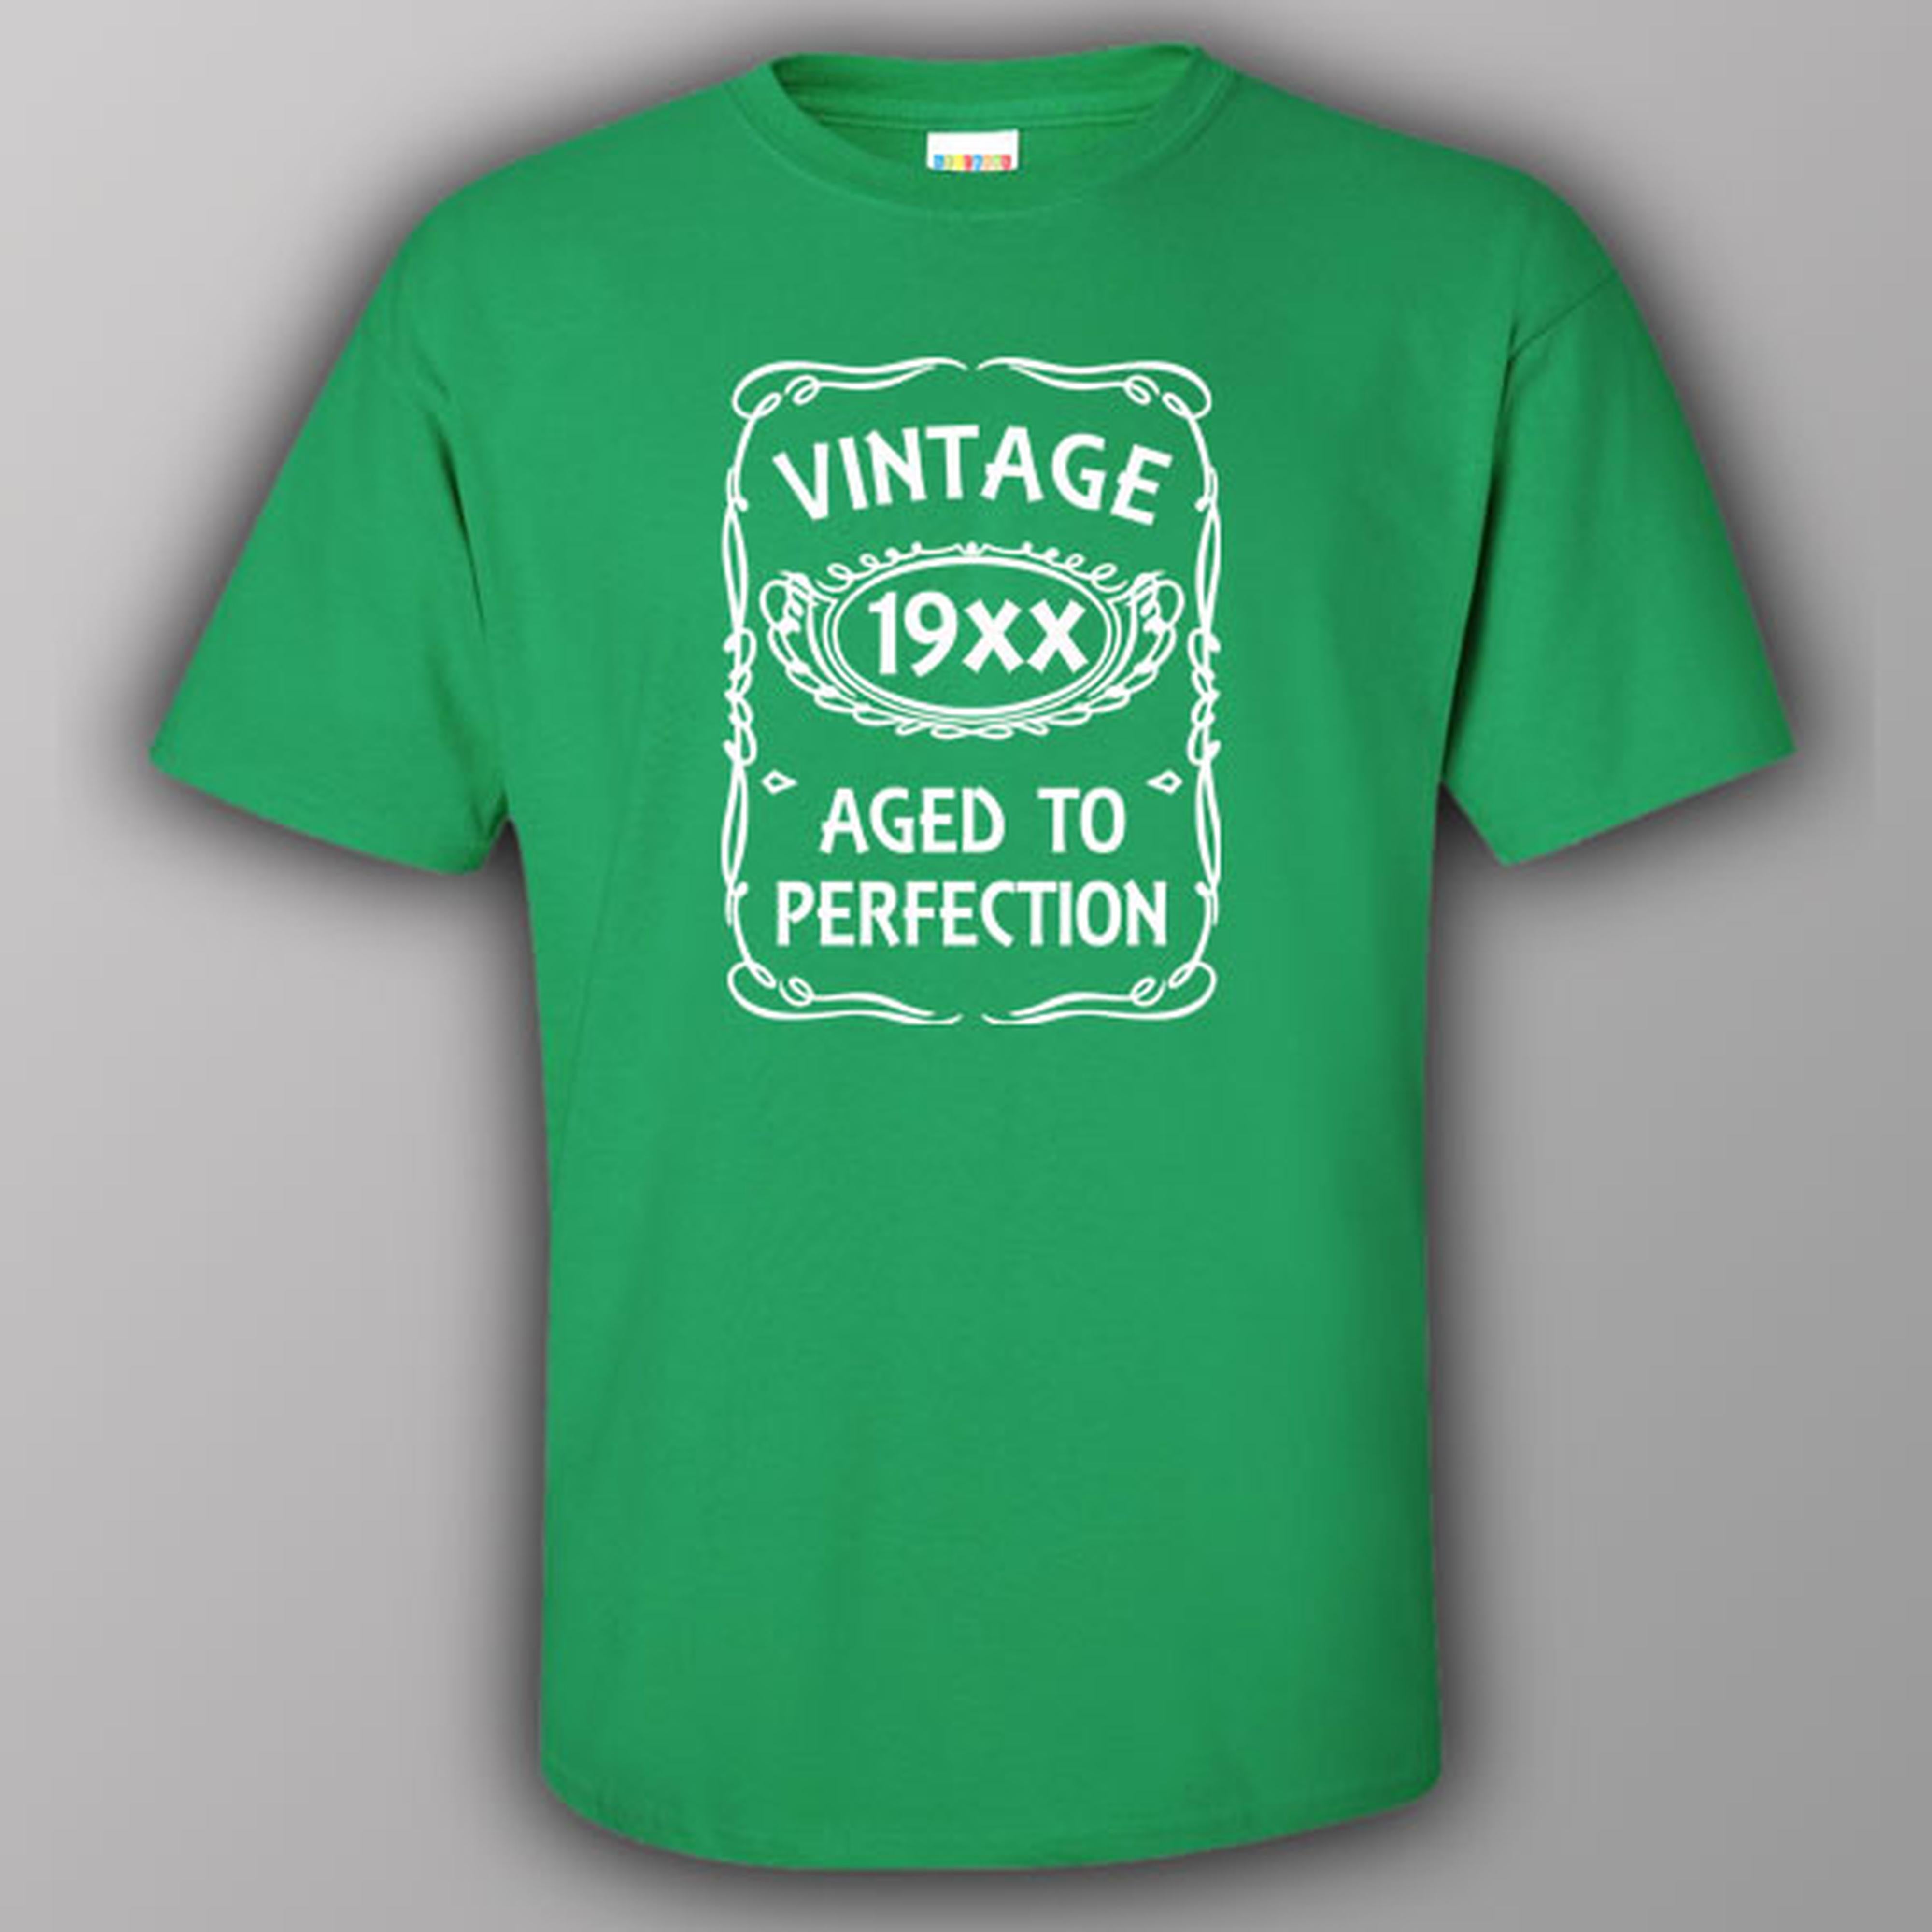 Vintage - ANY YEAR - Aged to perfection